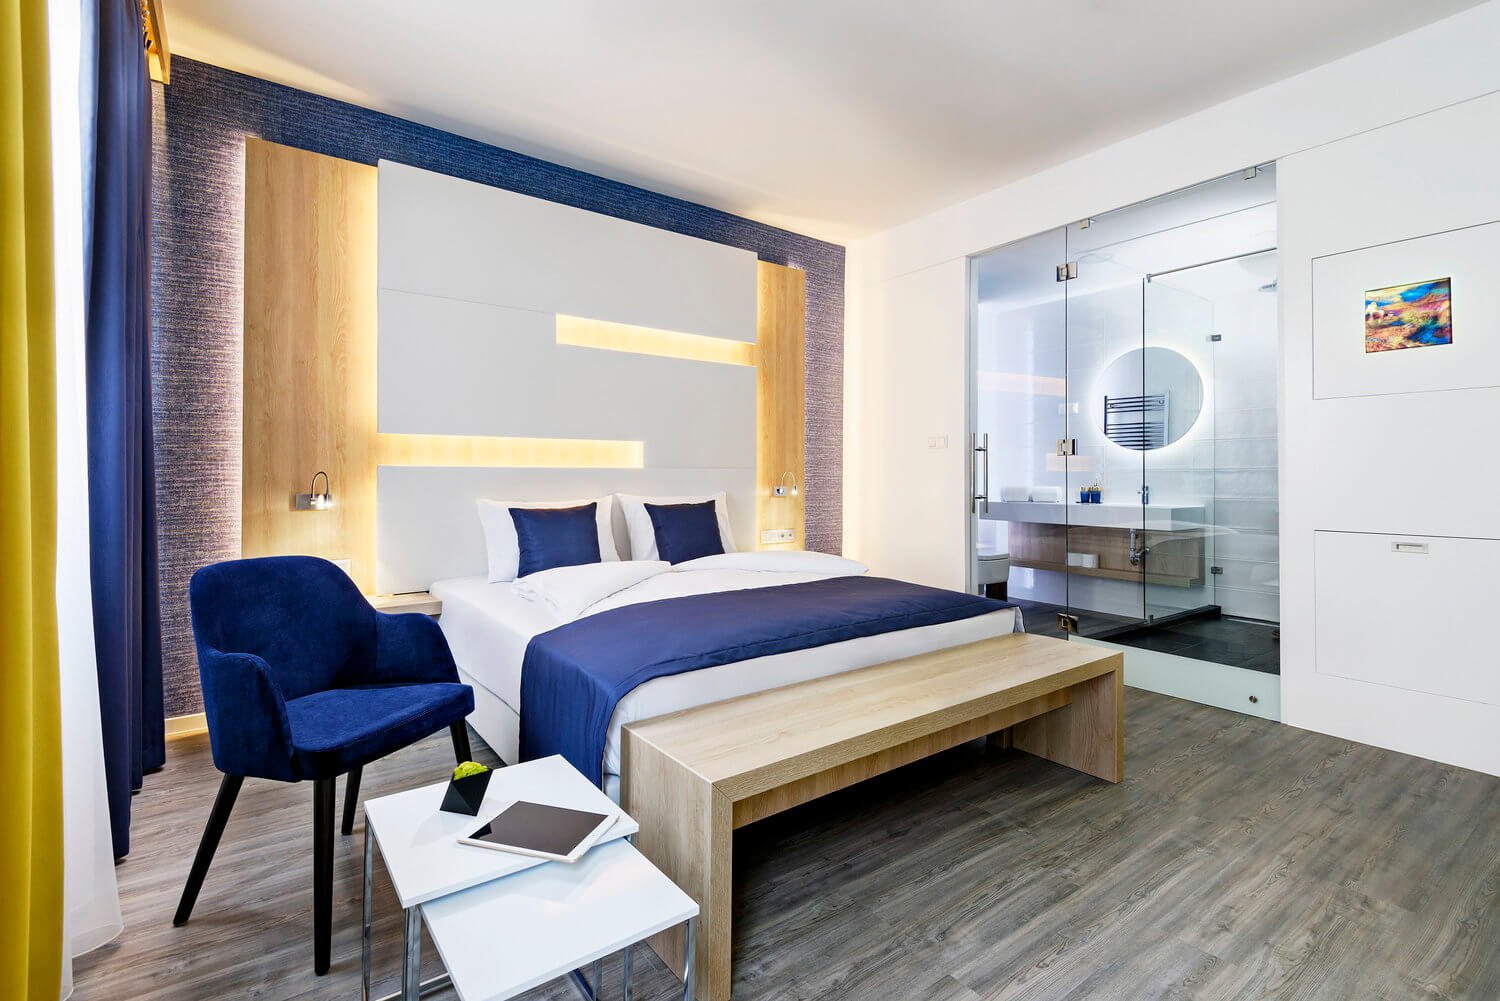 KViHotel deploys ASSA ABLOY Hospitality mobile access solution for keyless guestroom entry  